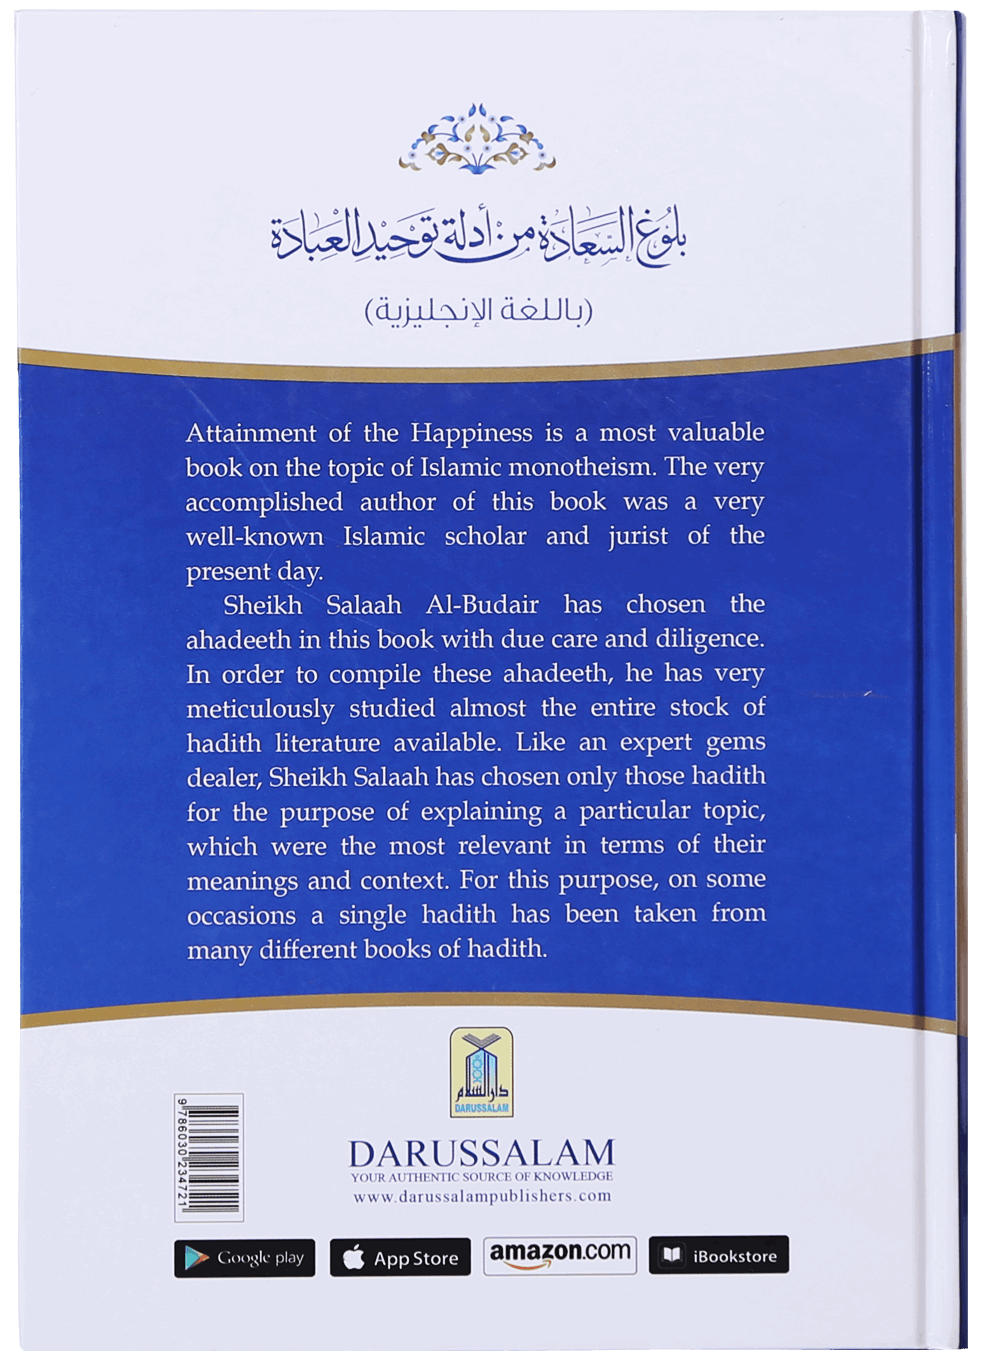 darussalam-2017-07-27-16-53-32attainment-of-the-happiness-(3)